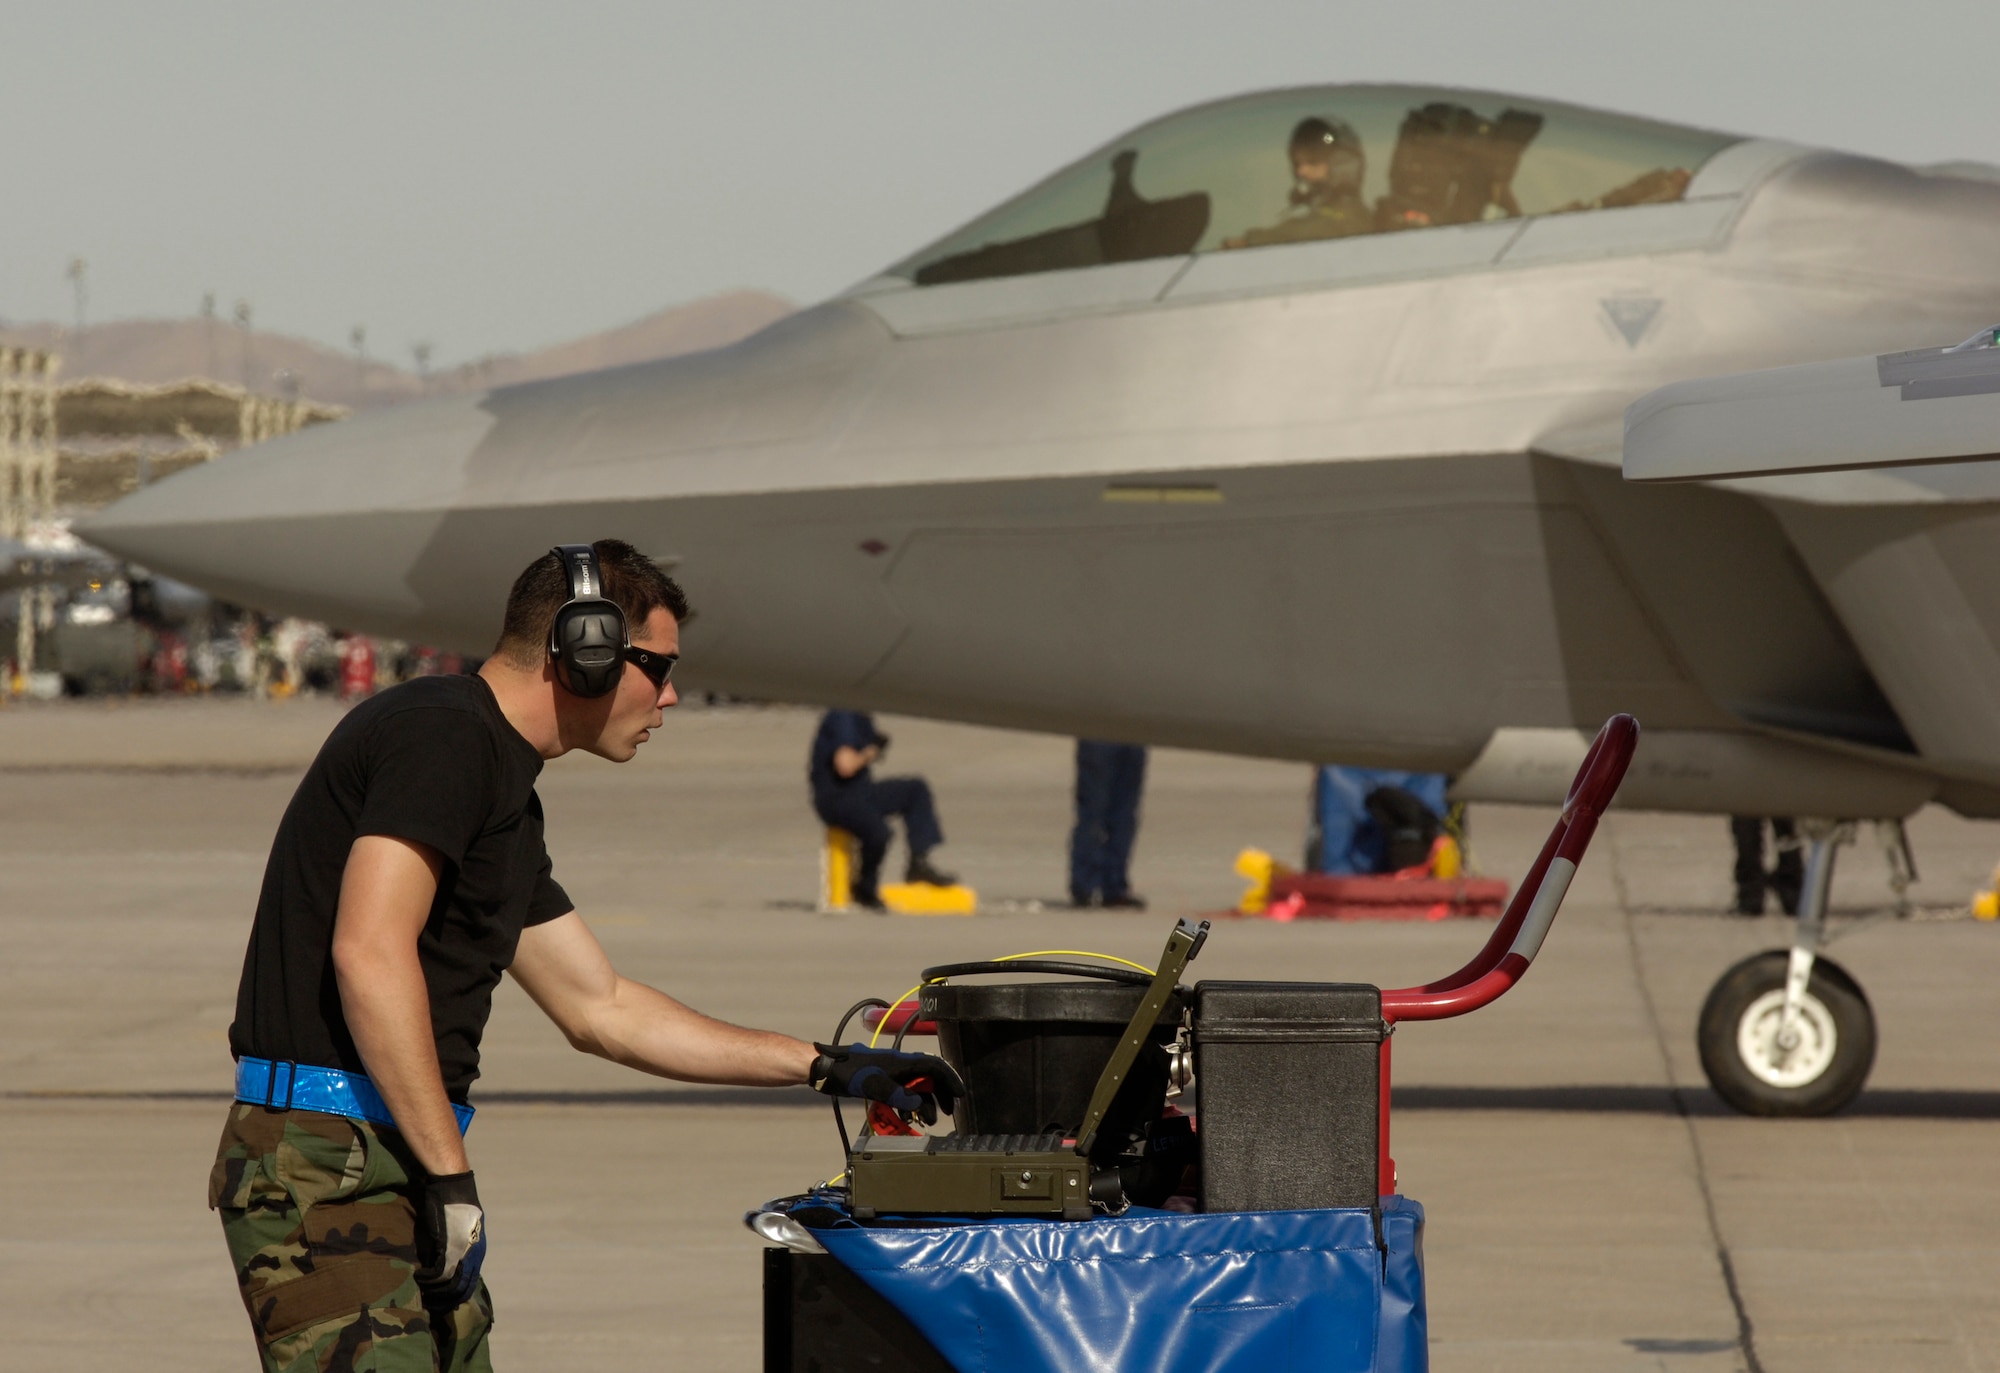 Senior Airman William Rotroff reviews F-22 Raptor data on a portable maintenance aid during Red Flag Feb. 6 at Nellis Air Force Base, Nev. The exercise sharpens aircrews' warfighting skills in realistic combat situations. This is the first deployment to Red Flag for the 94th Fighter Squadron with F-22 Raptors. Airman Rotroff is a tactical aircraft maintenance specialist at the 94th FS from Langley AFB, Va. (U.S. Air Force photo/Master Sgt. Kevin J. Gruenwald) 